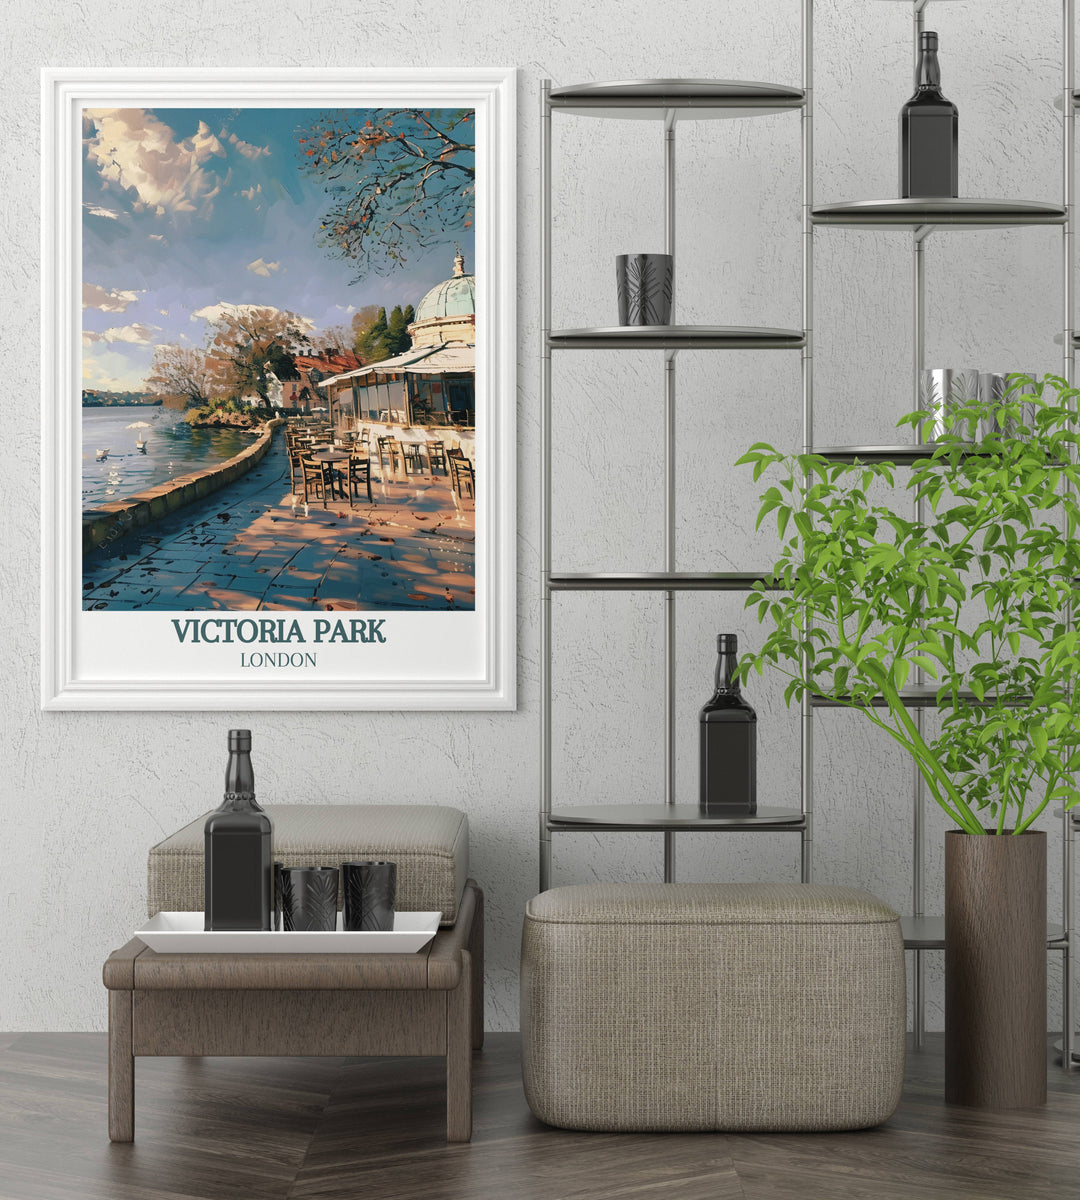 Victoria Park London travel poster featuring picturesque surroundings and tranquil waters ideal for art enthusiasts and travel lovers.